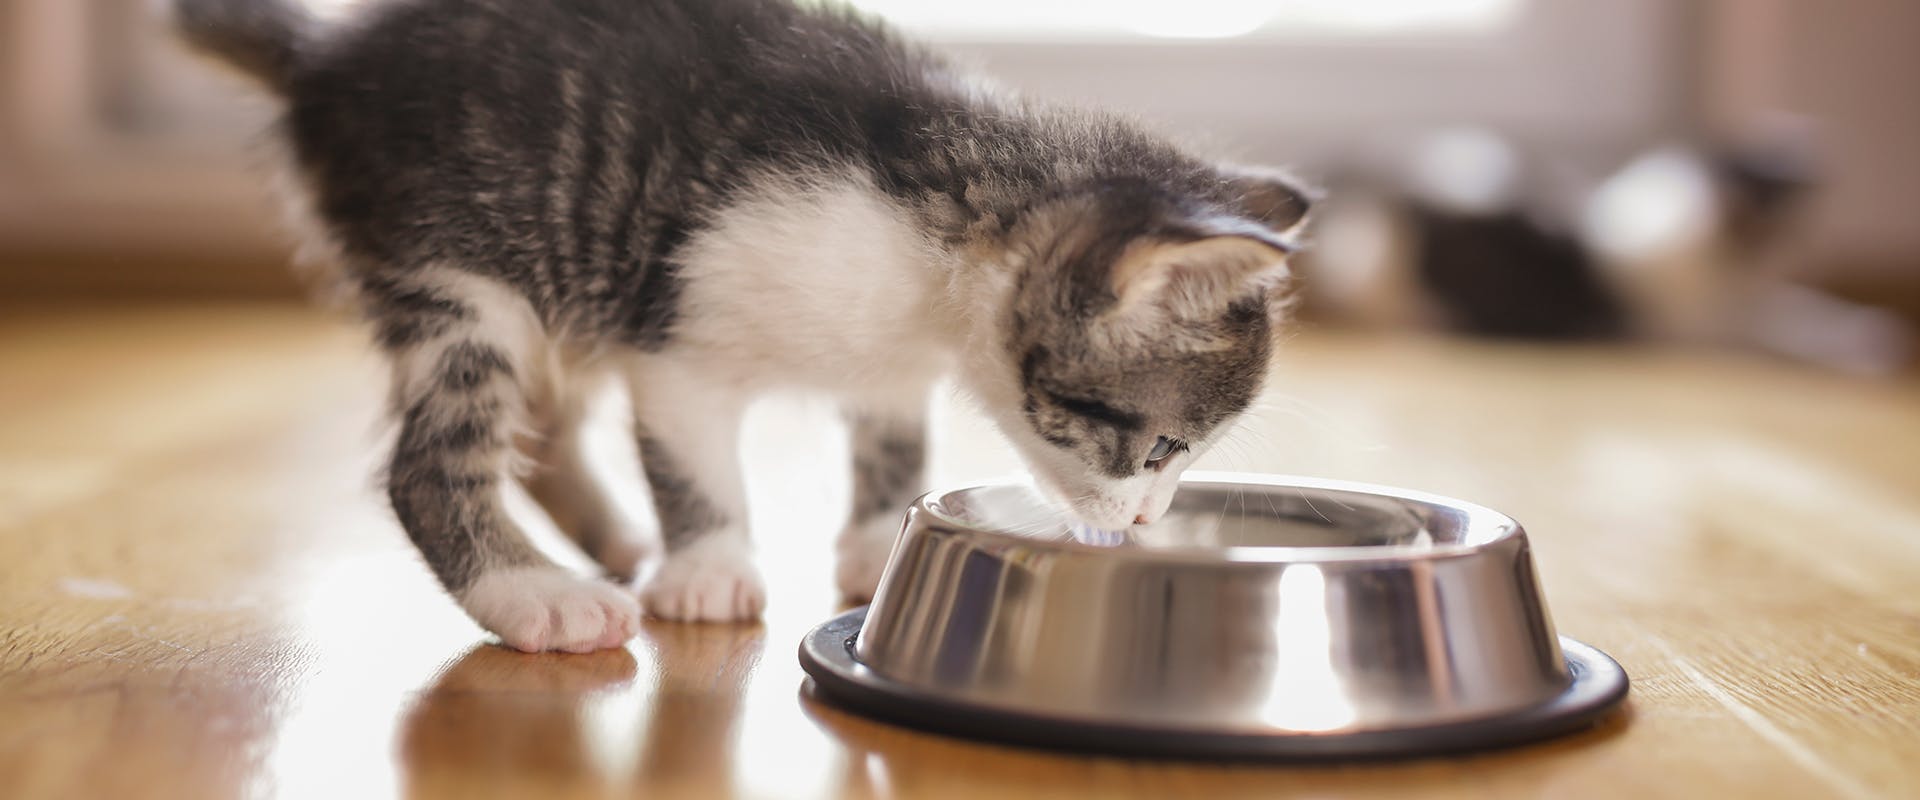 A kitten eating from a food bowl